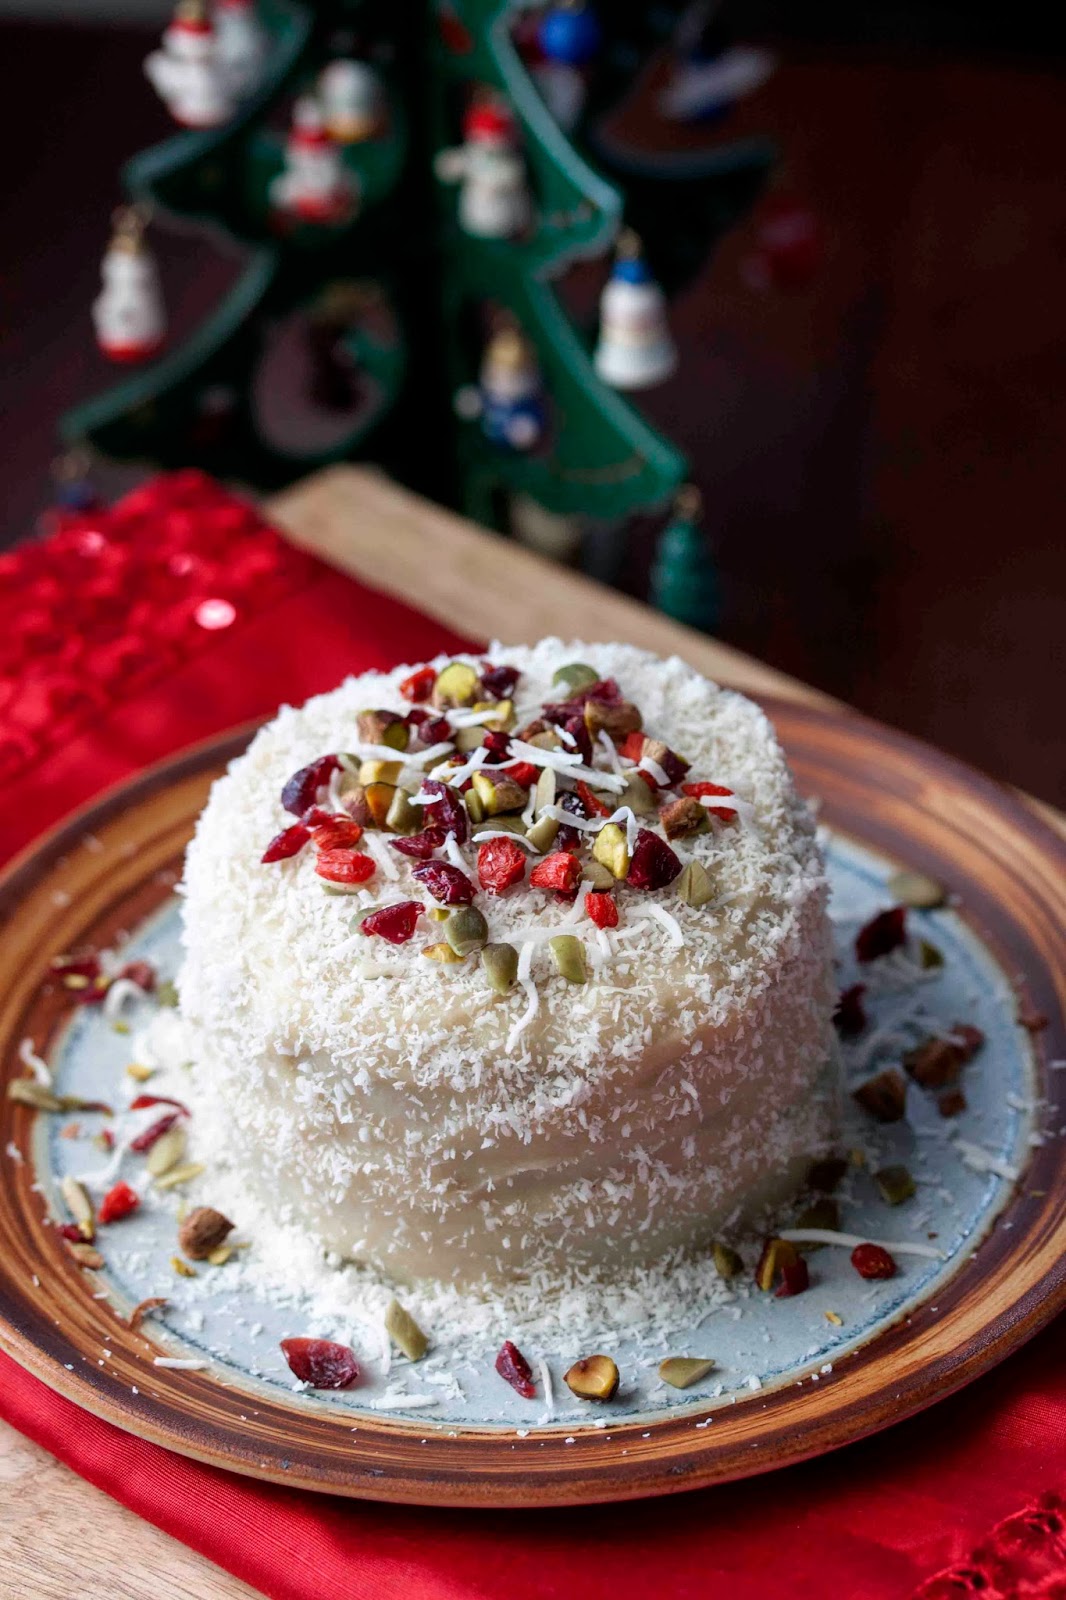 35 Scrumptious and Festive Christmas Cakes!